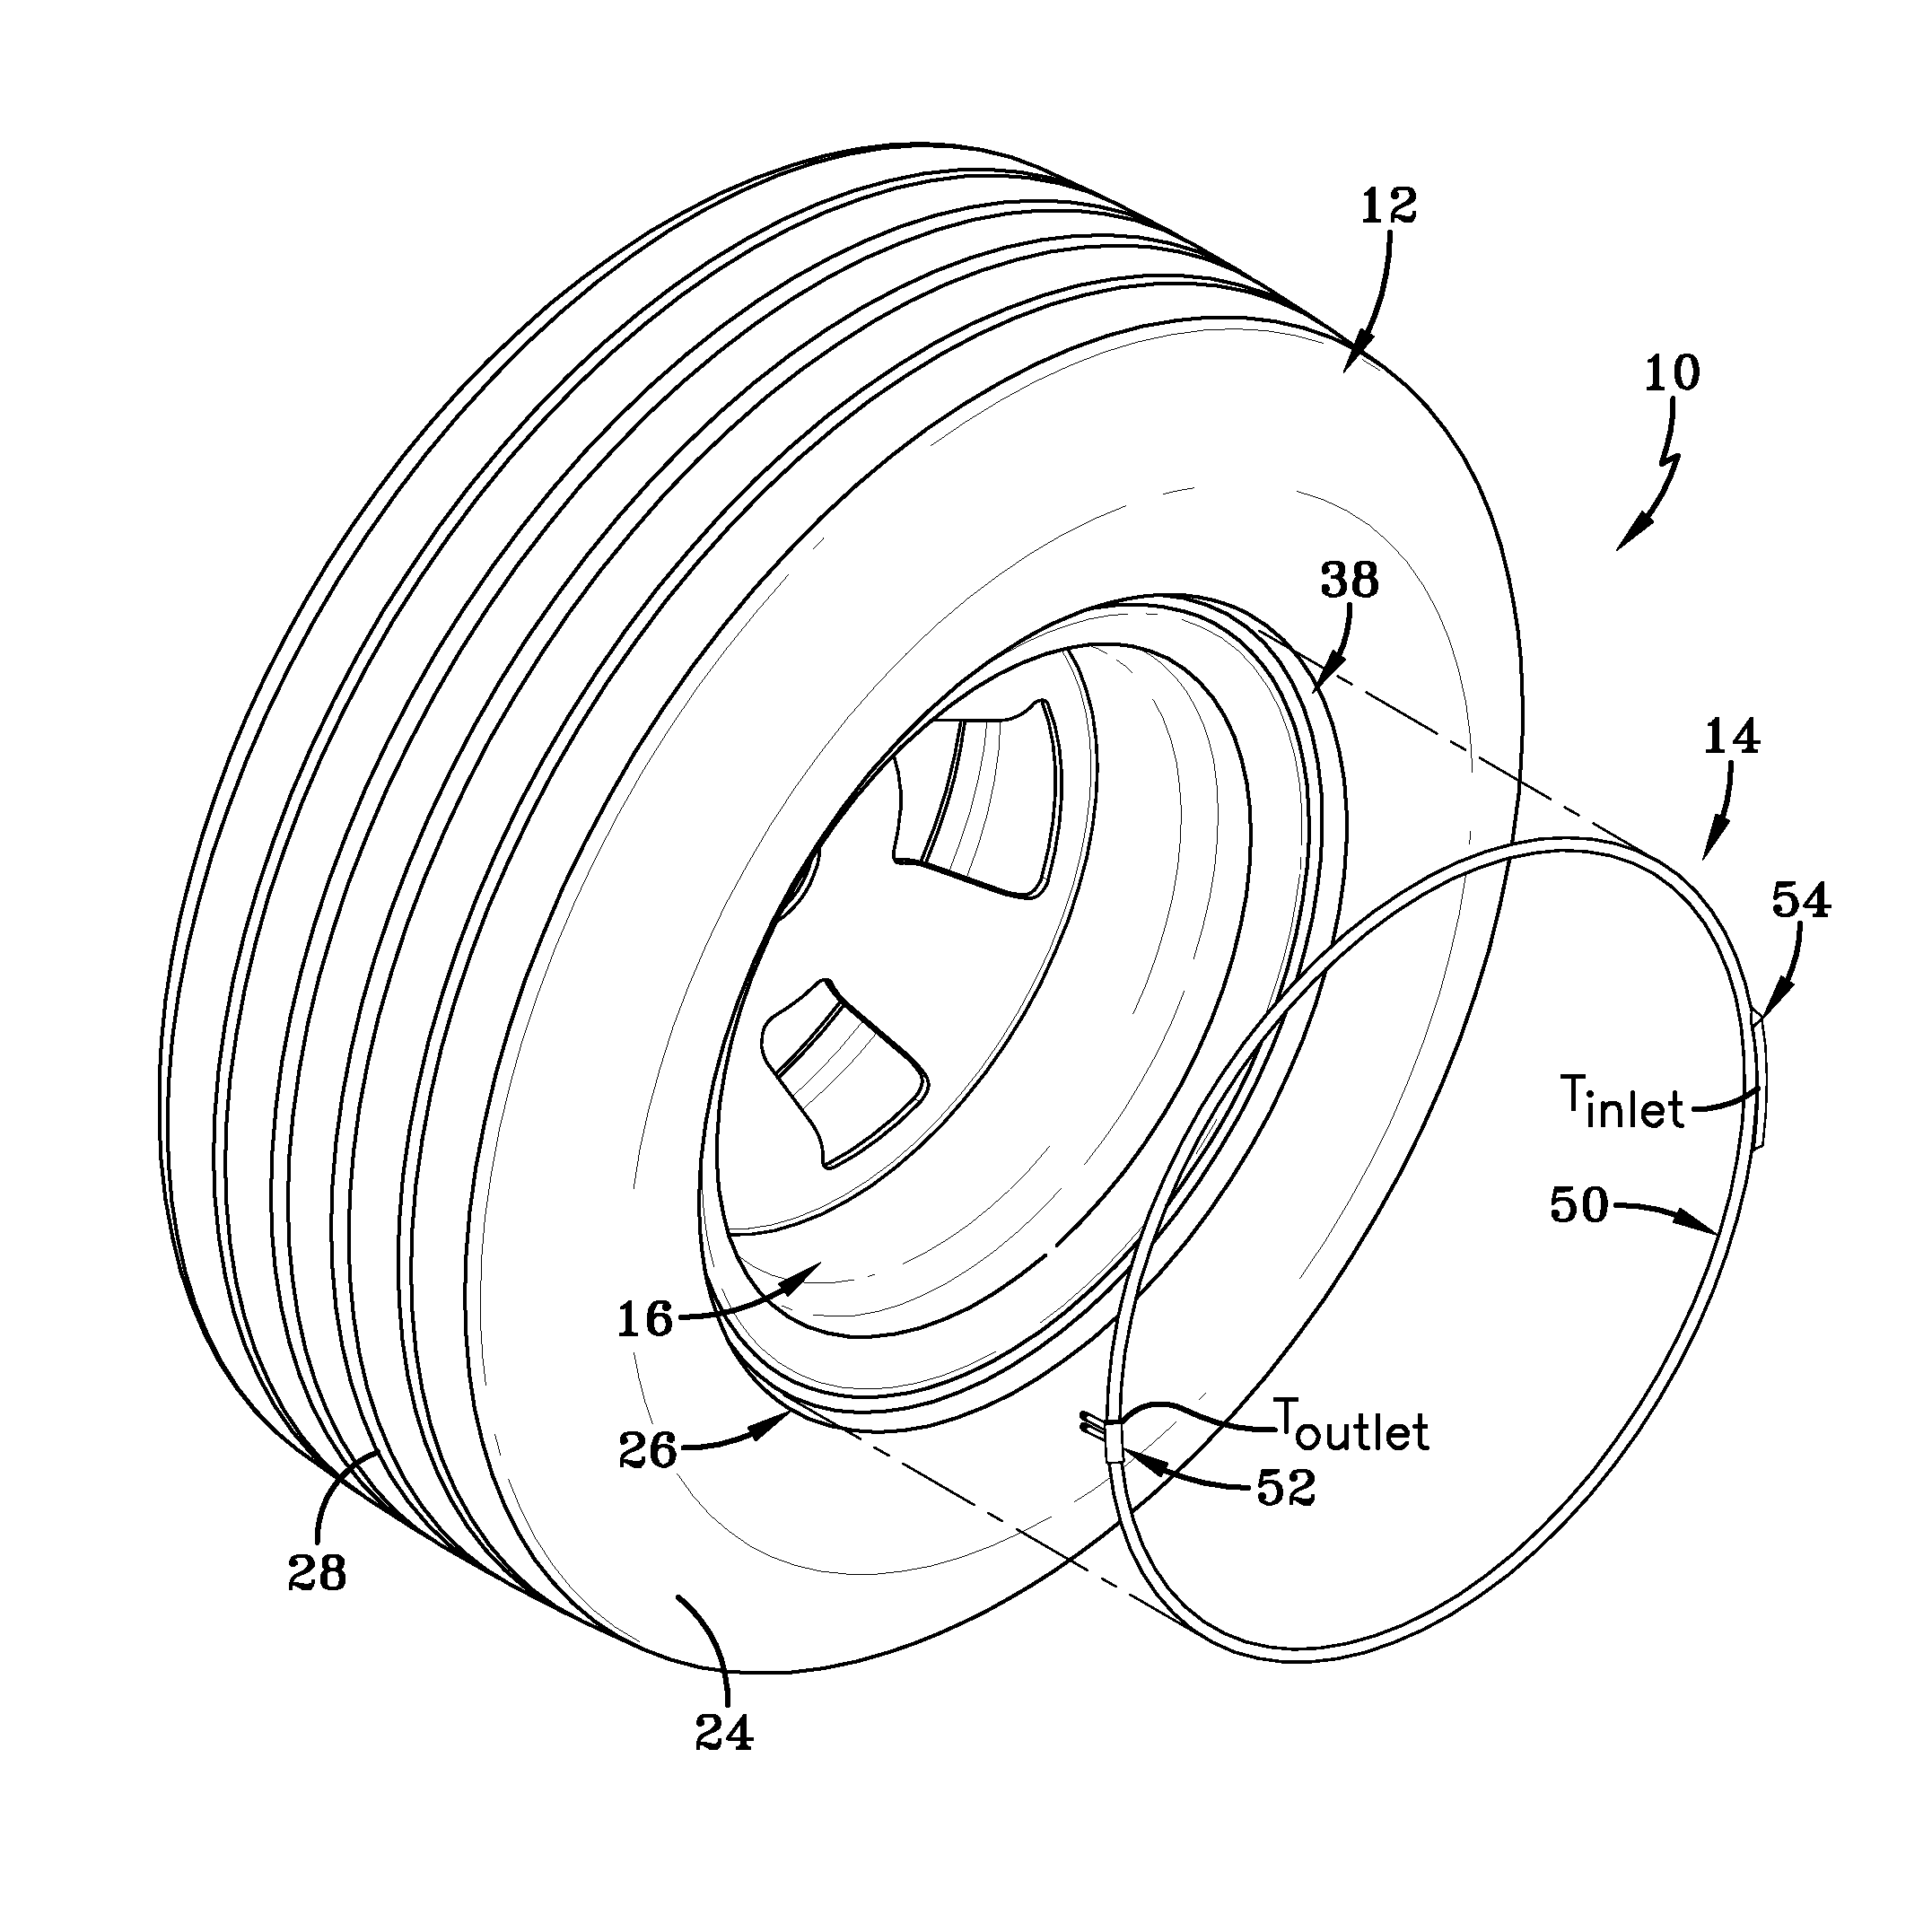 Method of manufacturing a self-inflating tire